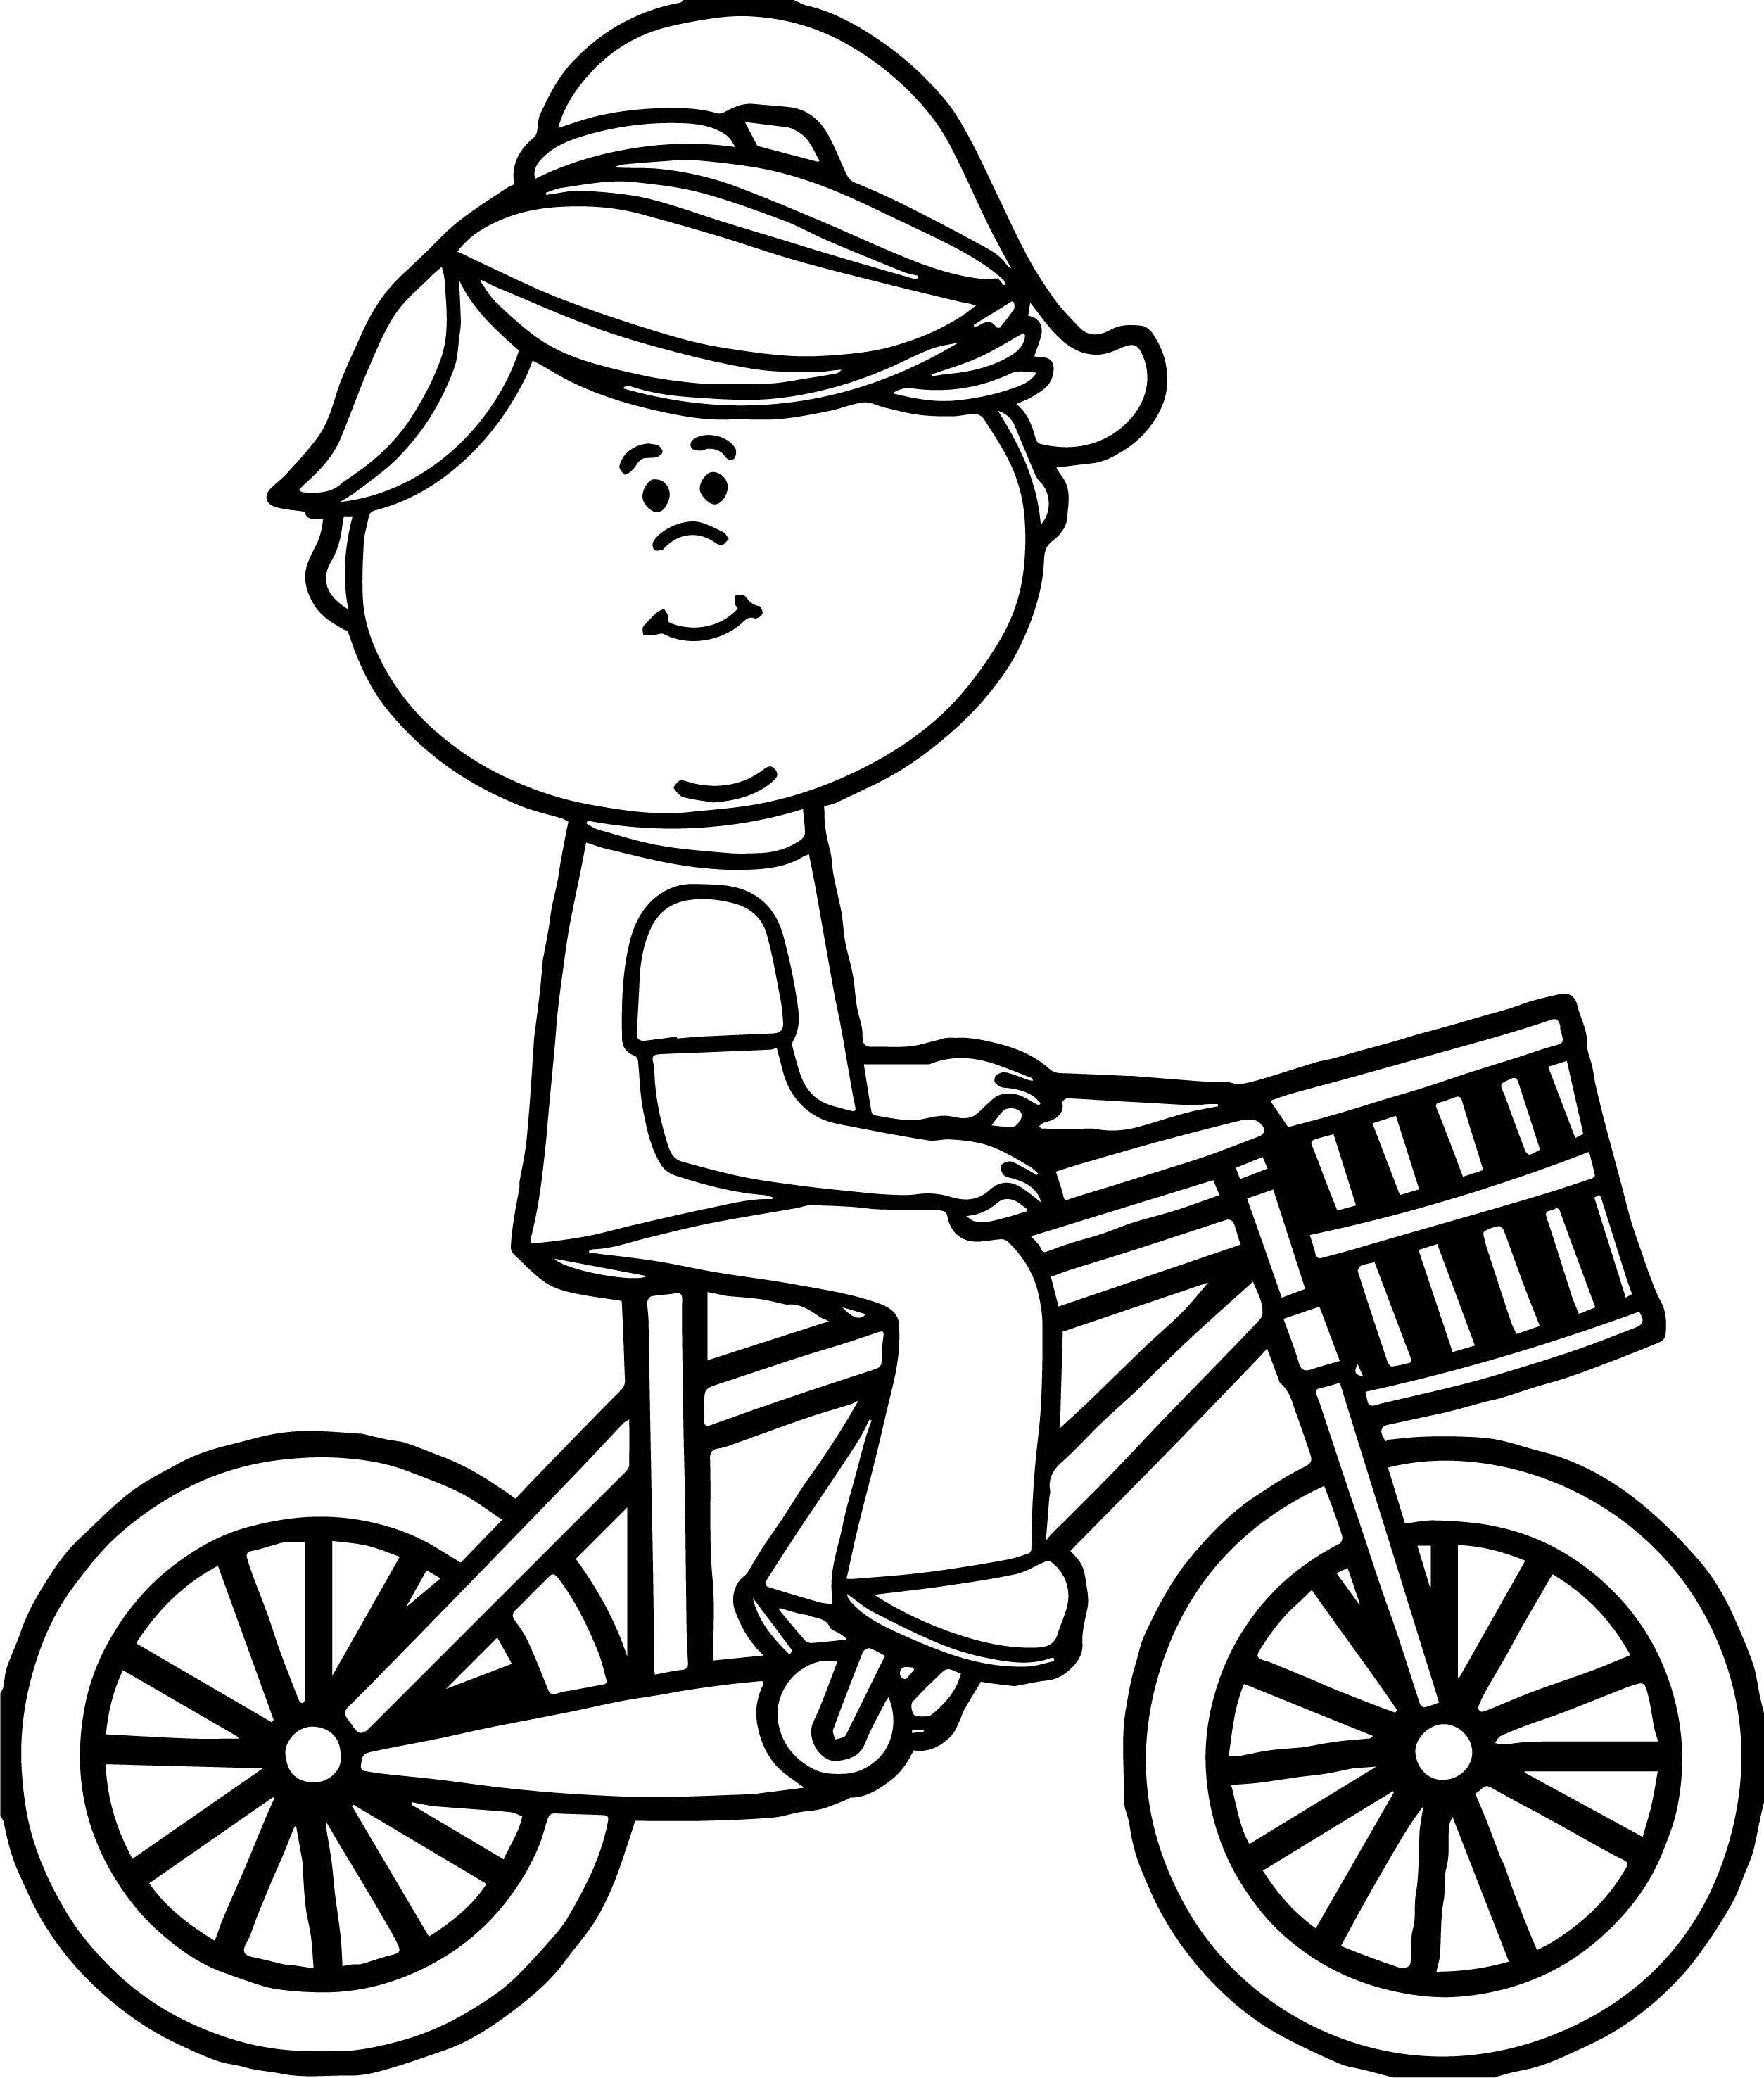 Bike Coloring Pages For Kids at Free printable